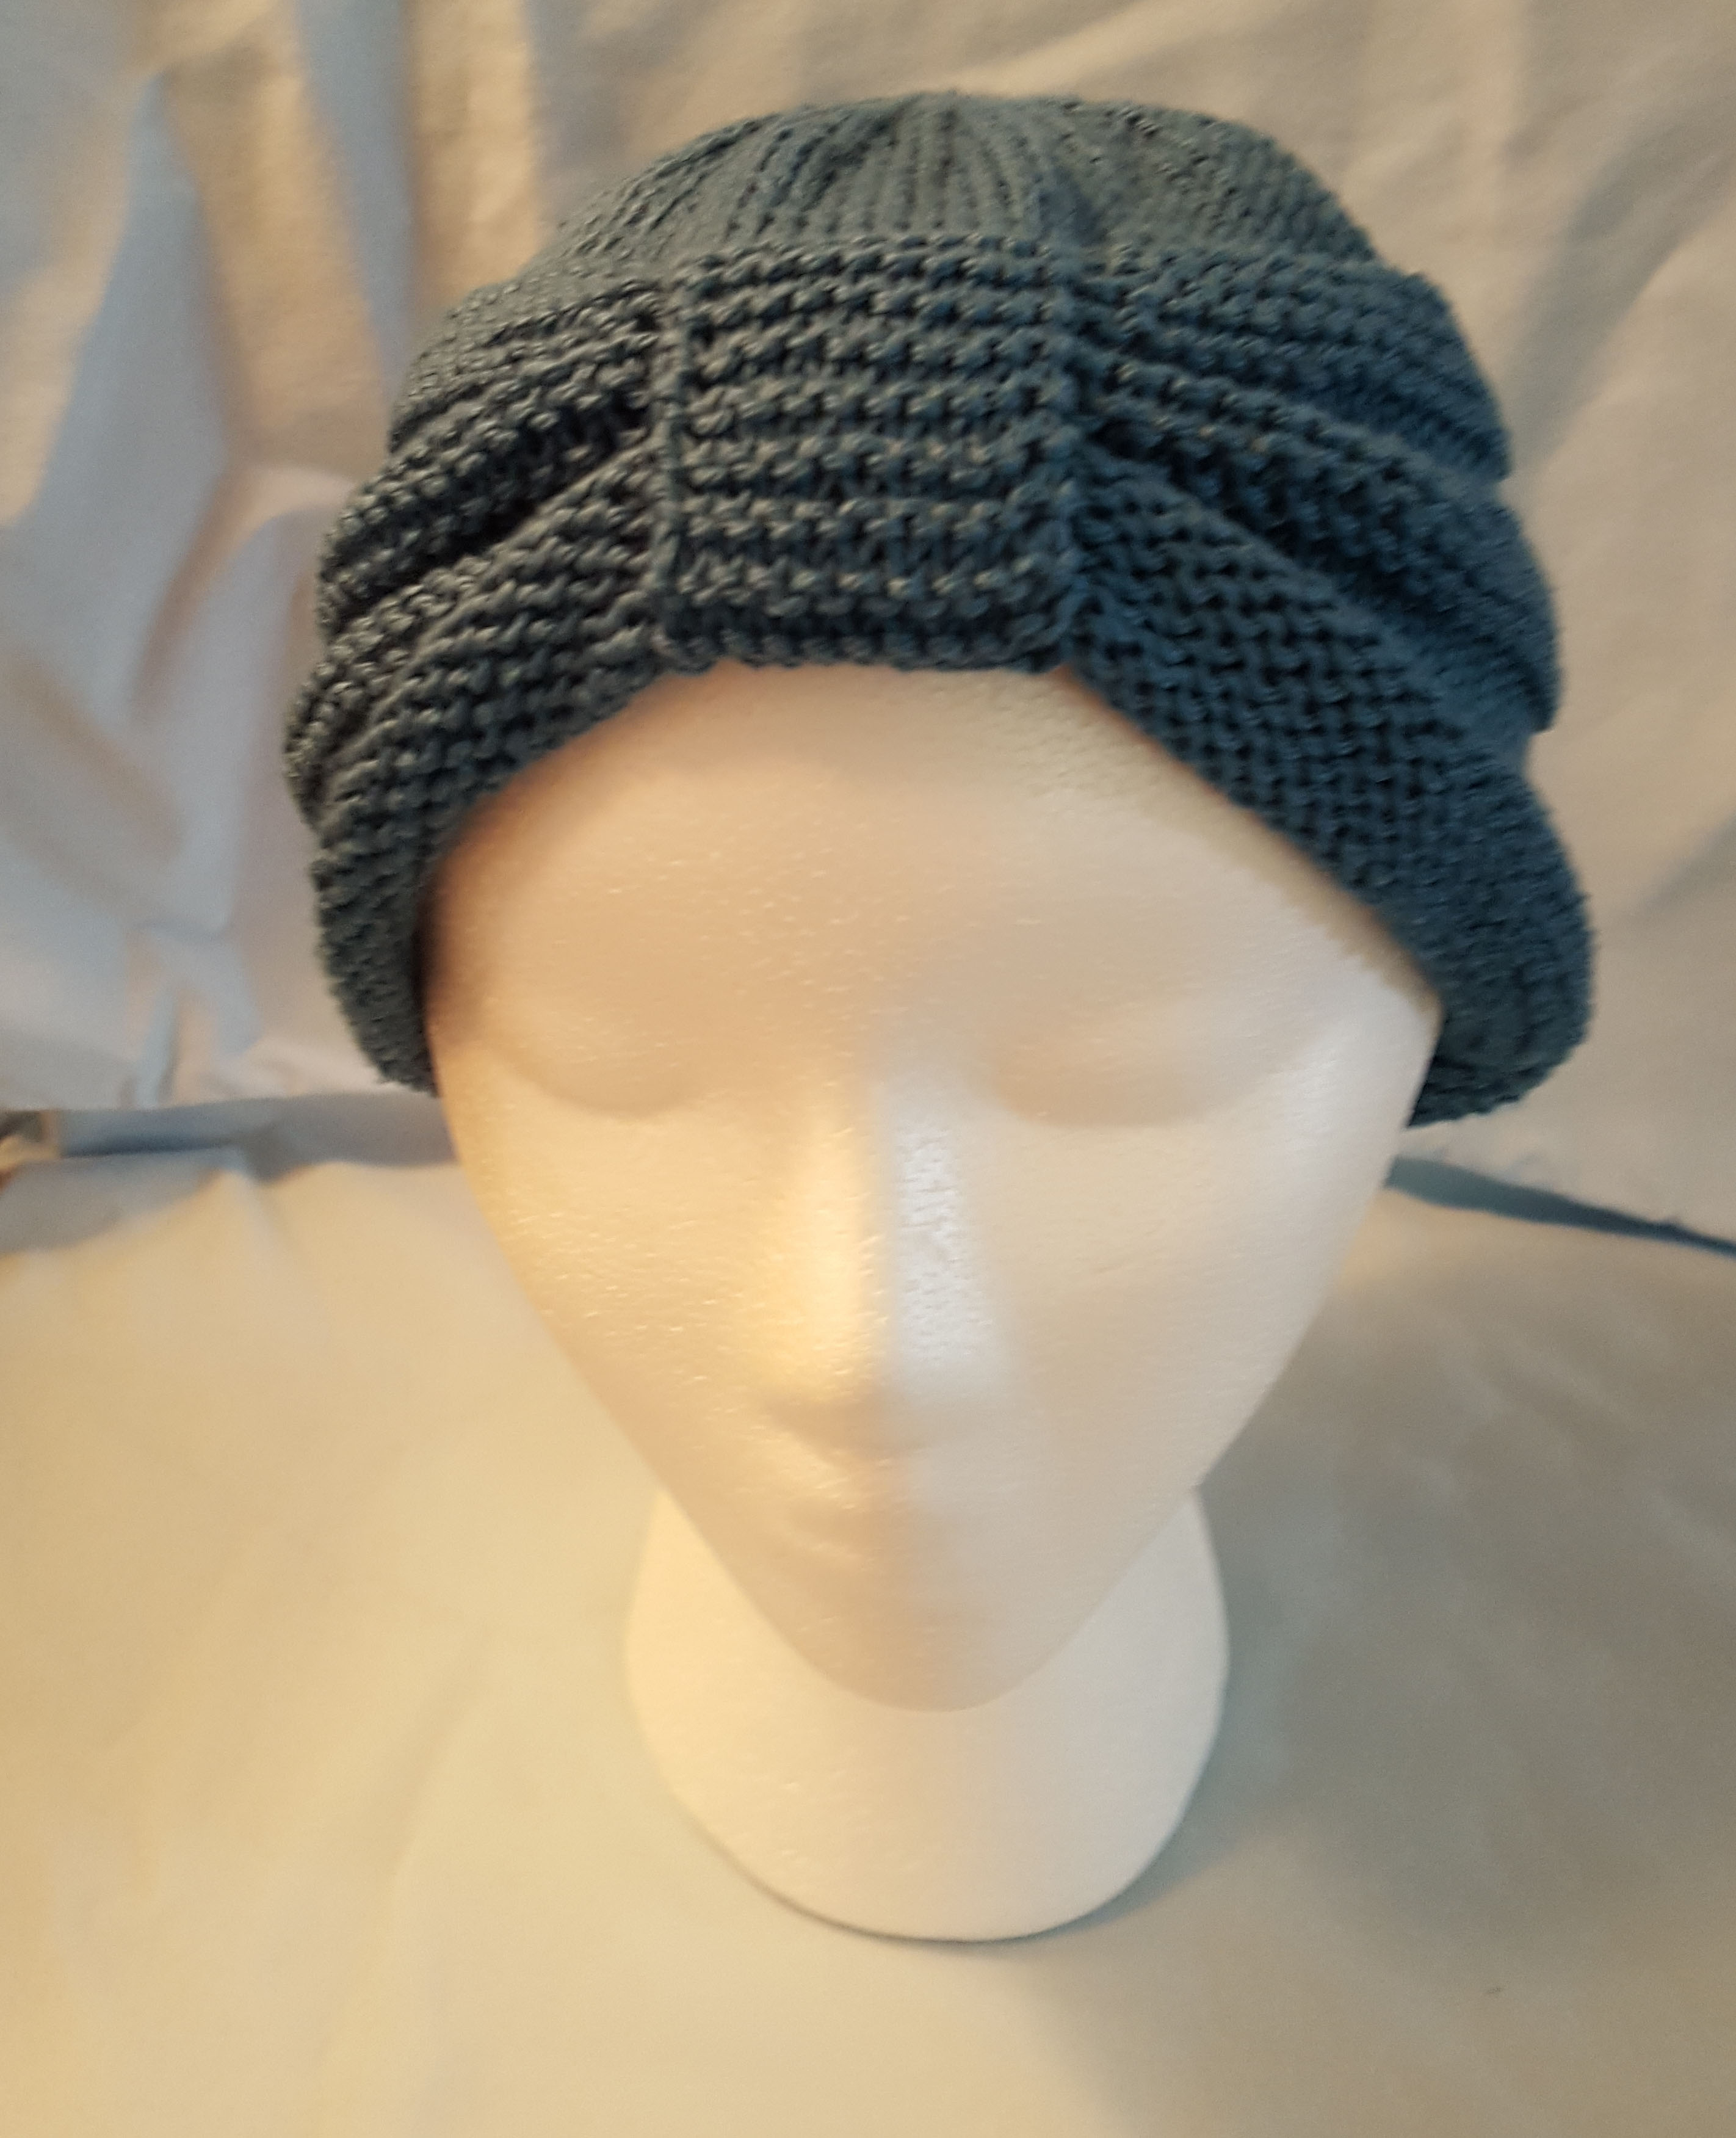 Crochet Chemo Caps Free Patterns New Pattern Knitted Turban Style Chemo Hat